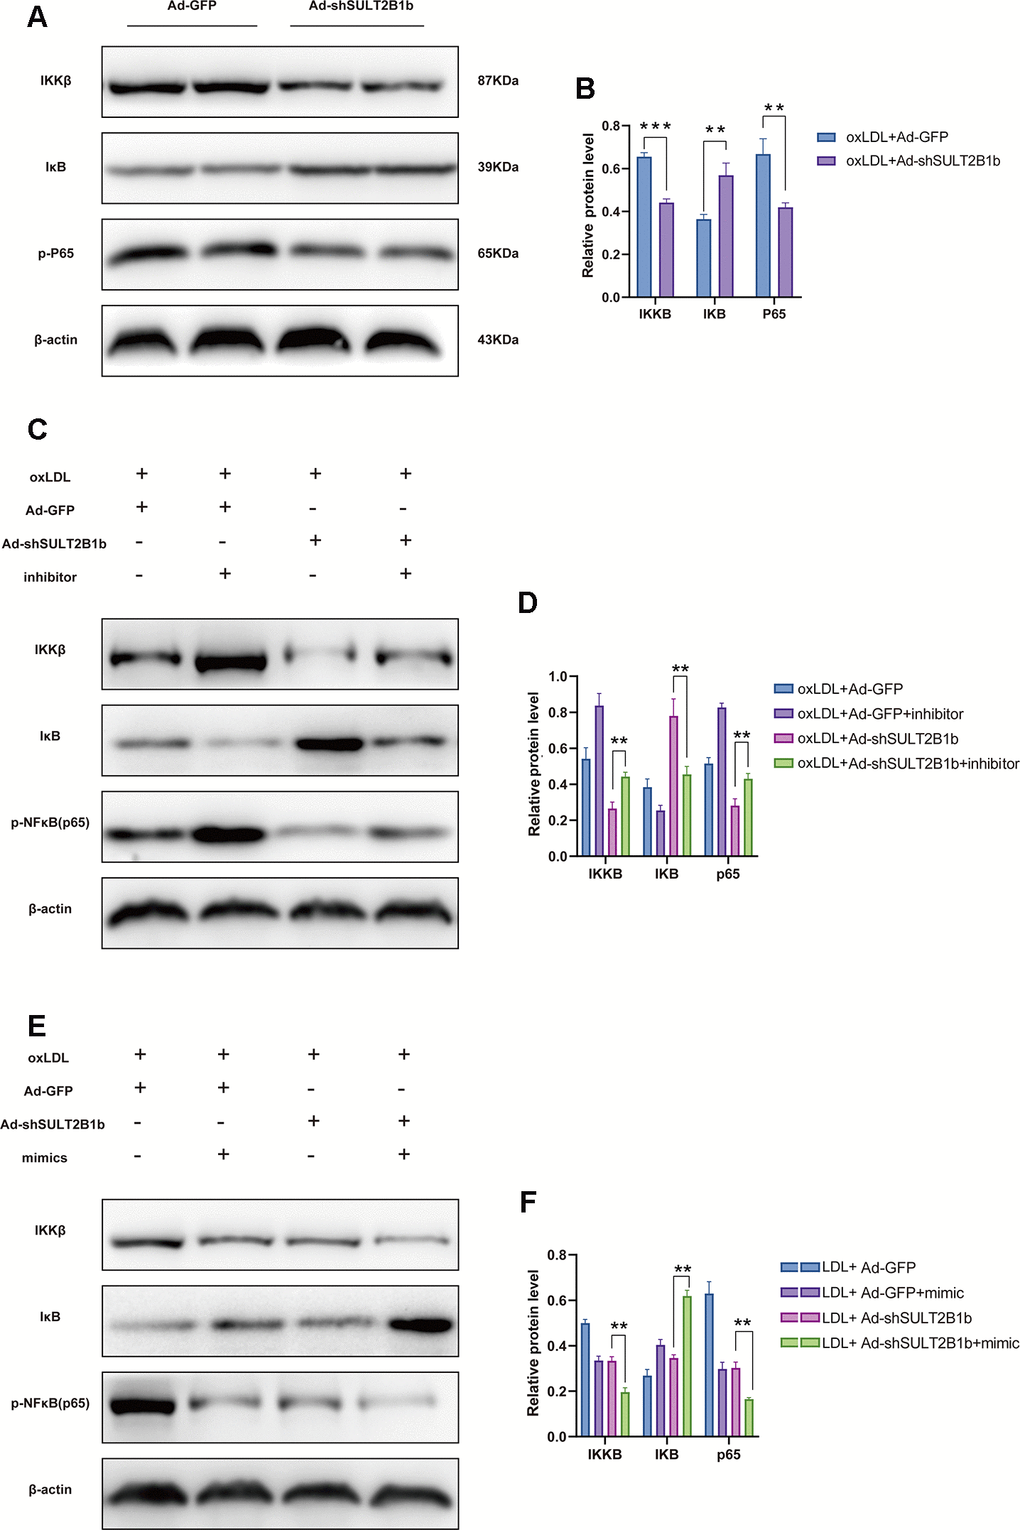 SULT2B1b regulates the IKKβ/IκB/NF-κB signalling pathway through miR-148a-3p. (A, B) The expression levels of IKKβ, IκB and phosphorylated nuclear factor-kappa B (p-p65) protein were determined by Western blotting in Raw264.7 cells transfected with Ad-GFP or Ad-shSULT2B1b. (C) Raw264.7 cells were transfected with Ad-GFP or Ad-shSULT2B1b and stimulated with ox-LDL. Then, the cells were transfected with miR-148a-3p inhibitor (C, D) or miR-148a-3p mimic (E, F). IKKβ, IκB and p-p65 expression levels were determined by Western blotting (C, E). β-actin was used as a reference control. The relative levels of IKKβ, IκB and phosphorylated p65 were quantitively compared (D, F). Data are shown as the mean±SD of at least three independent experiments. **p